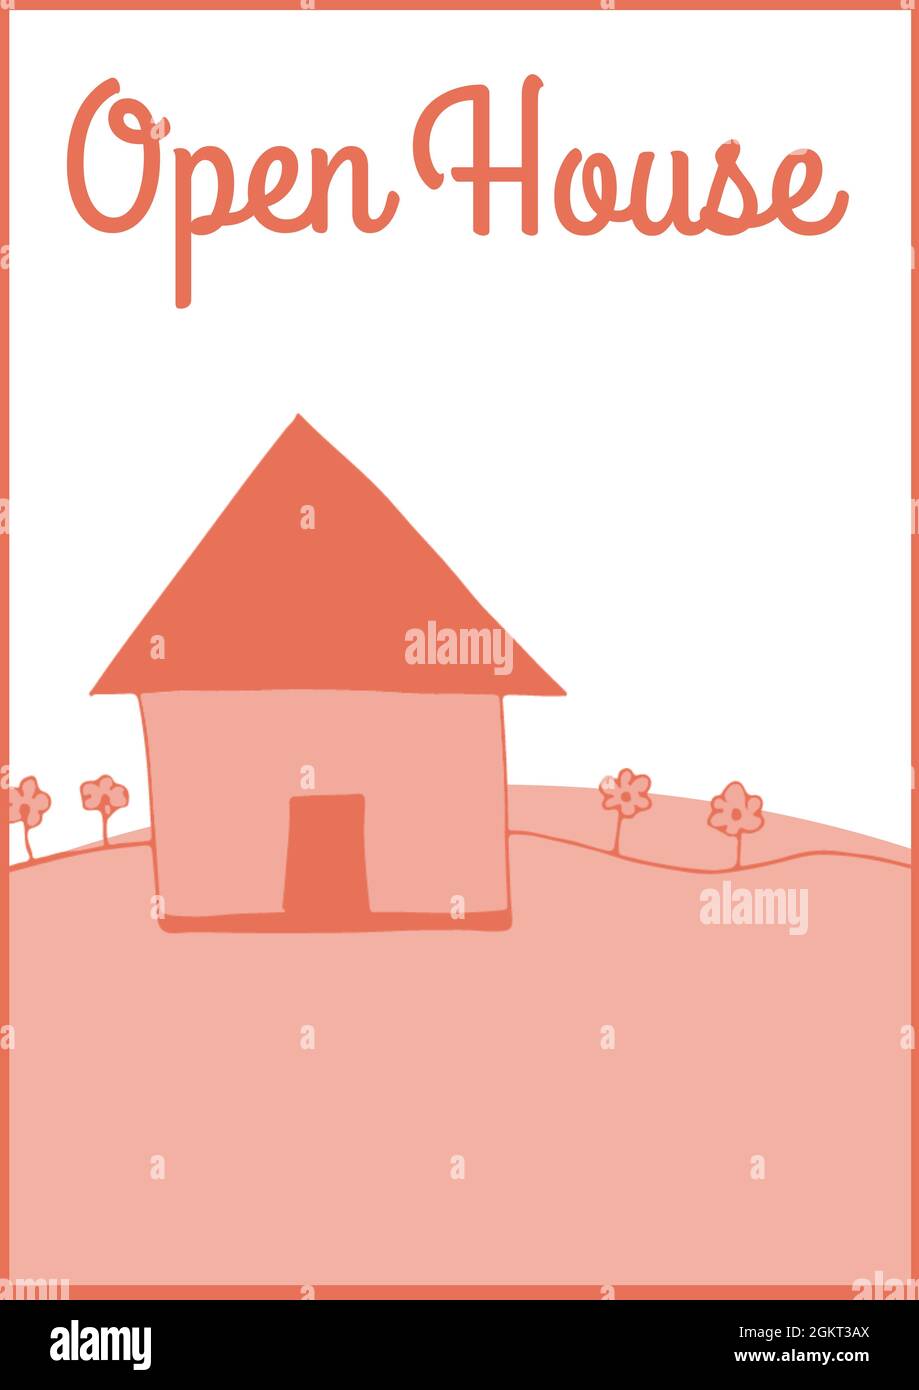 Digitally generated image of open house text over landscape with a house icon on white background Stock Photo